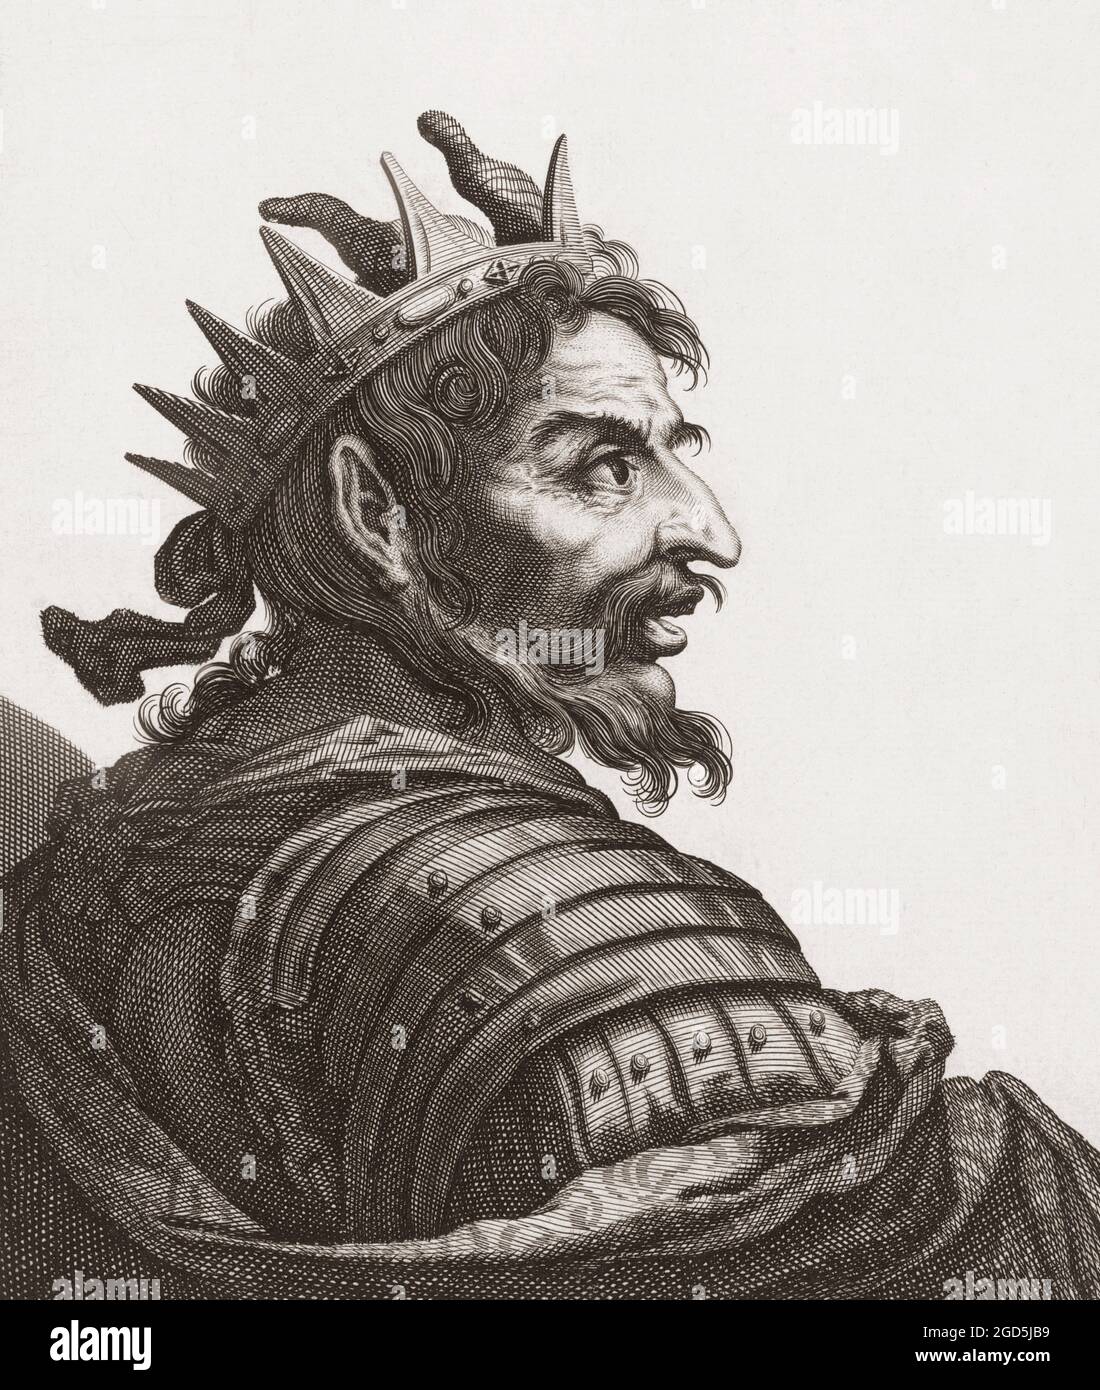 Attila the Hun, c. 406 - c. 453. Leader of the Huns who eventually led a tribal empire which included Ostrogoths and Alans.  From a 17th century print by Jerome David. Stock Photo